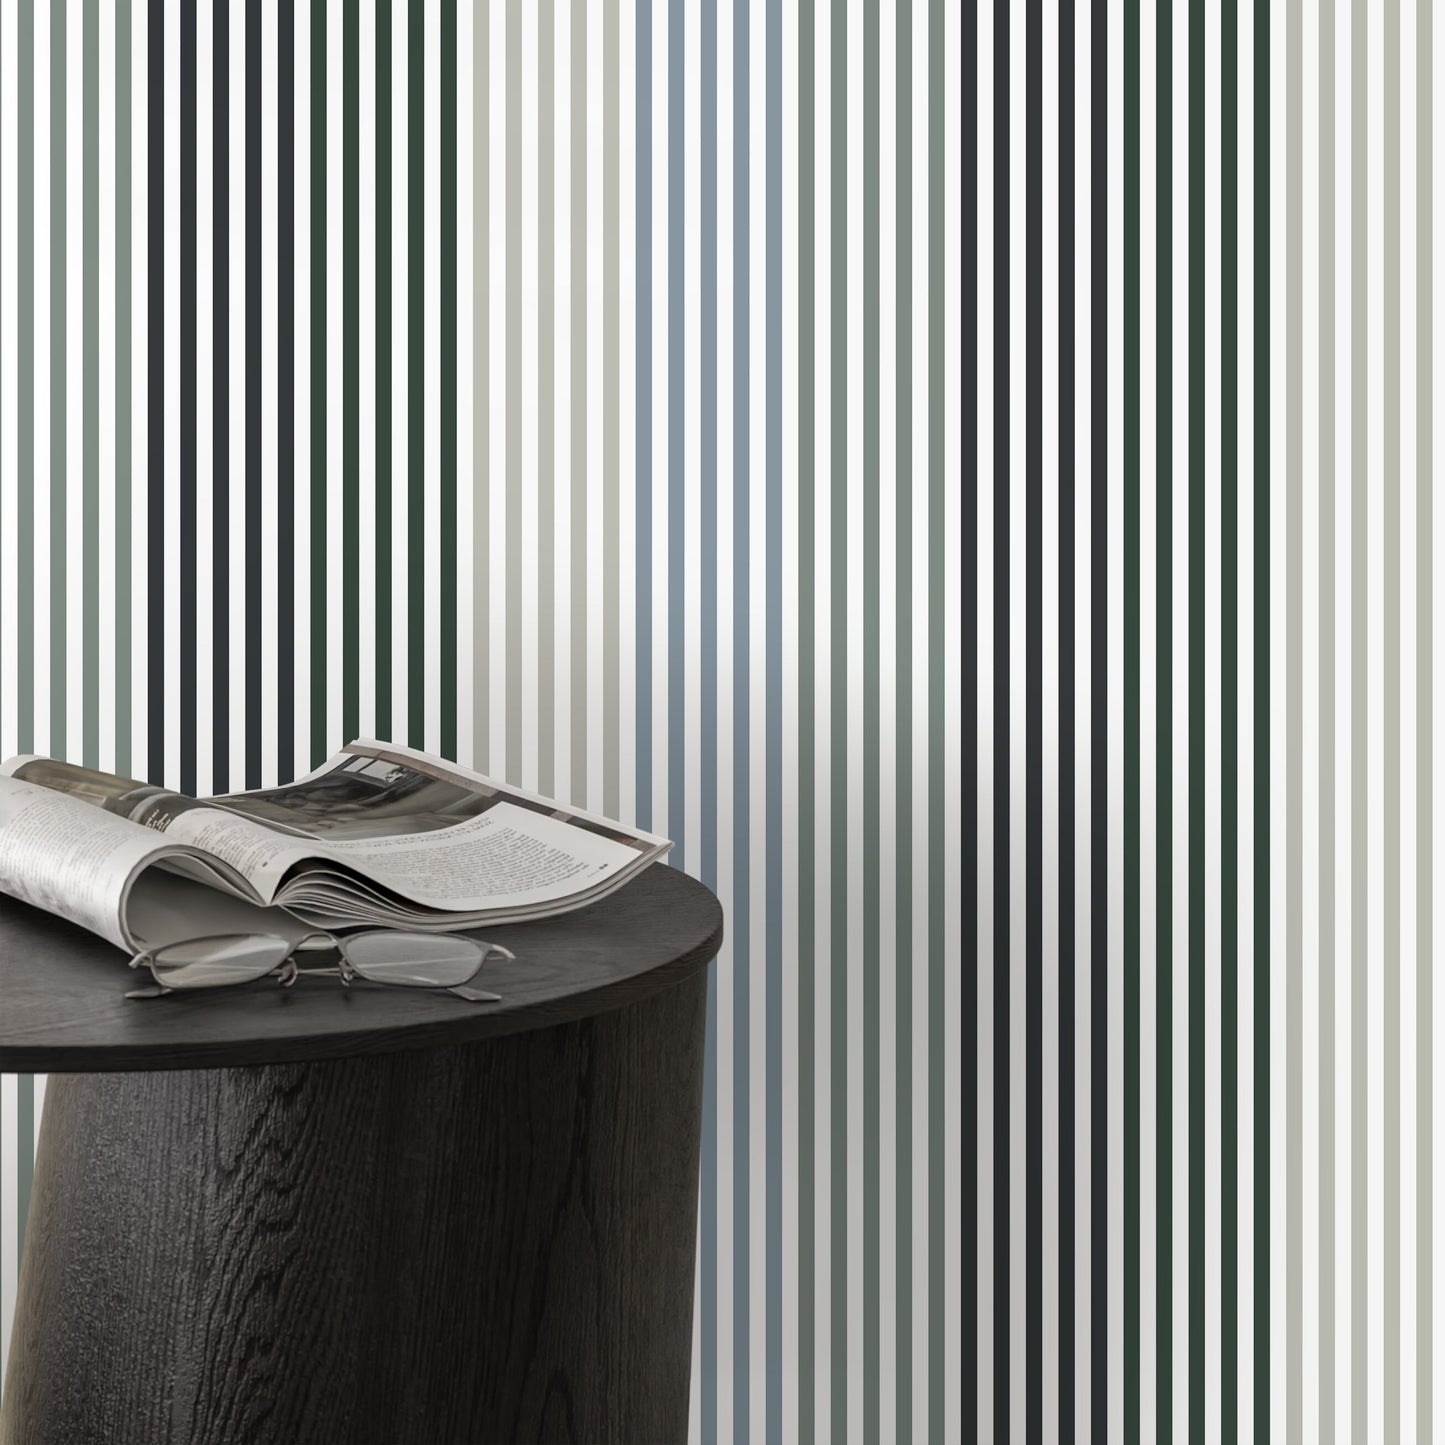 Geometric Striped Wallpaper Modern Wallpaper Peel and Stick and Traditional Wallpaper - D756